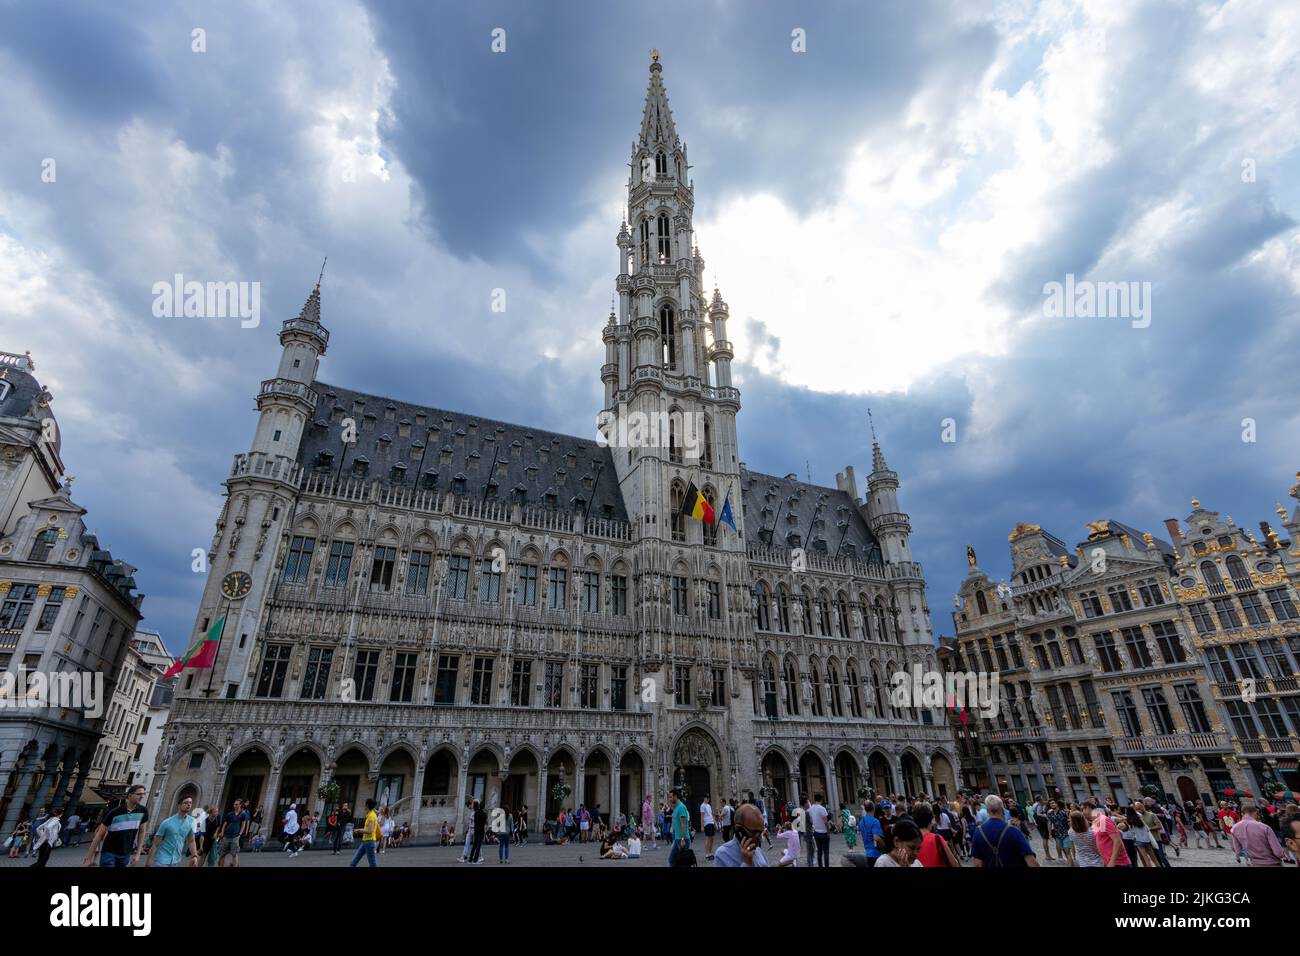 Brussels, Belgium - July 16, 2018: The historical Town Hall of Brussels Stock Photo